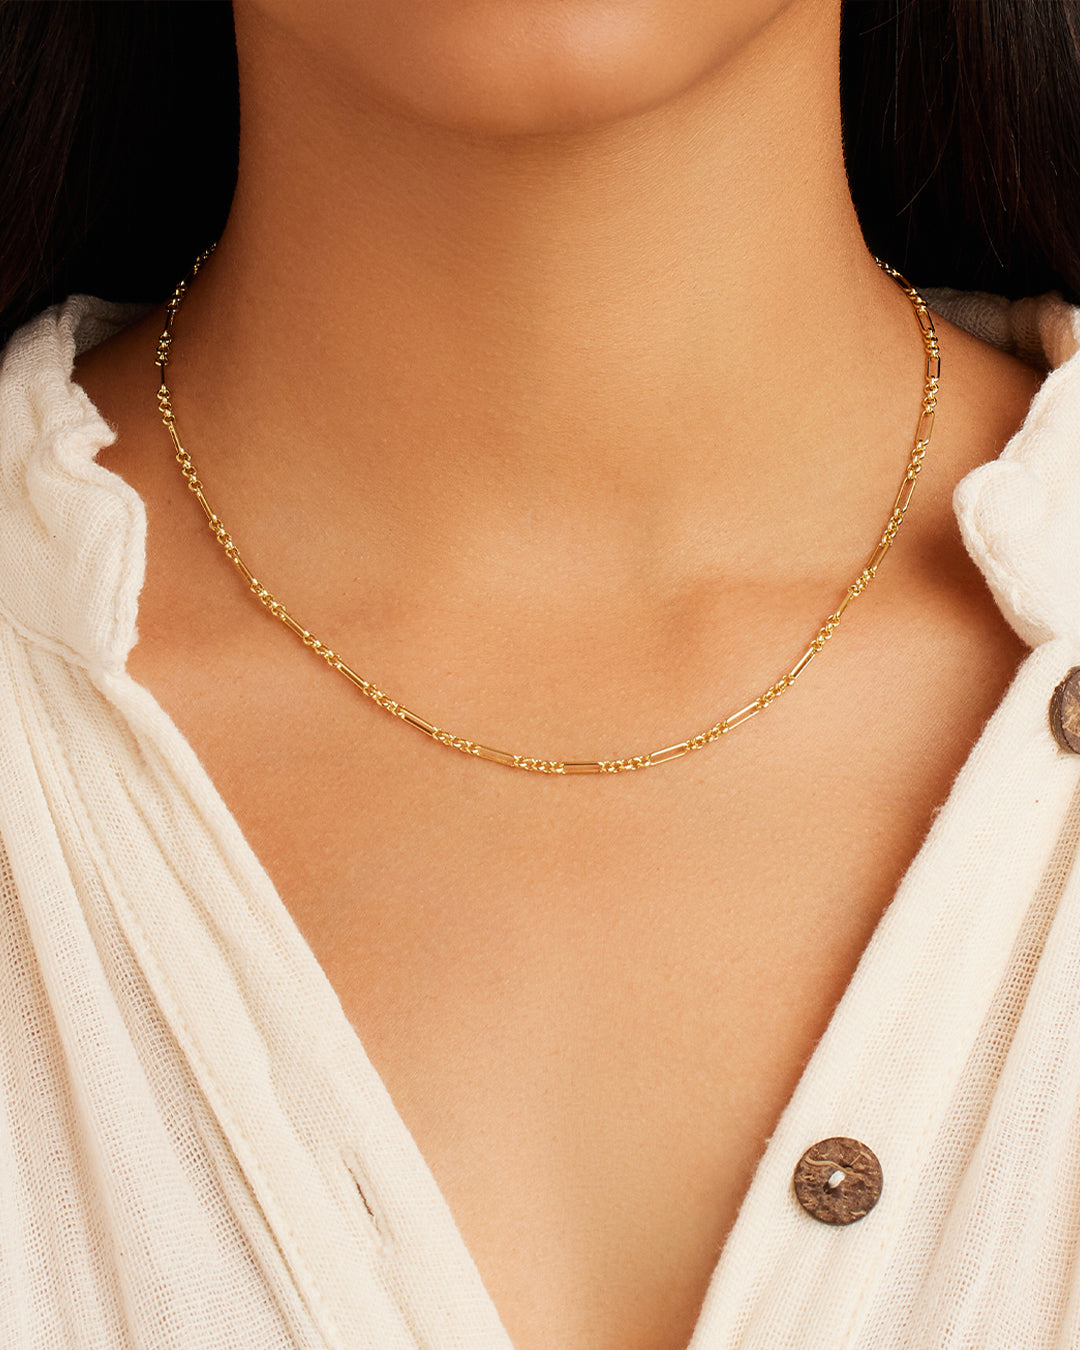 16 Delicate Necklaces That Are Perfect For Layering | HuffPost Life